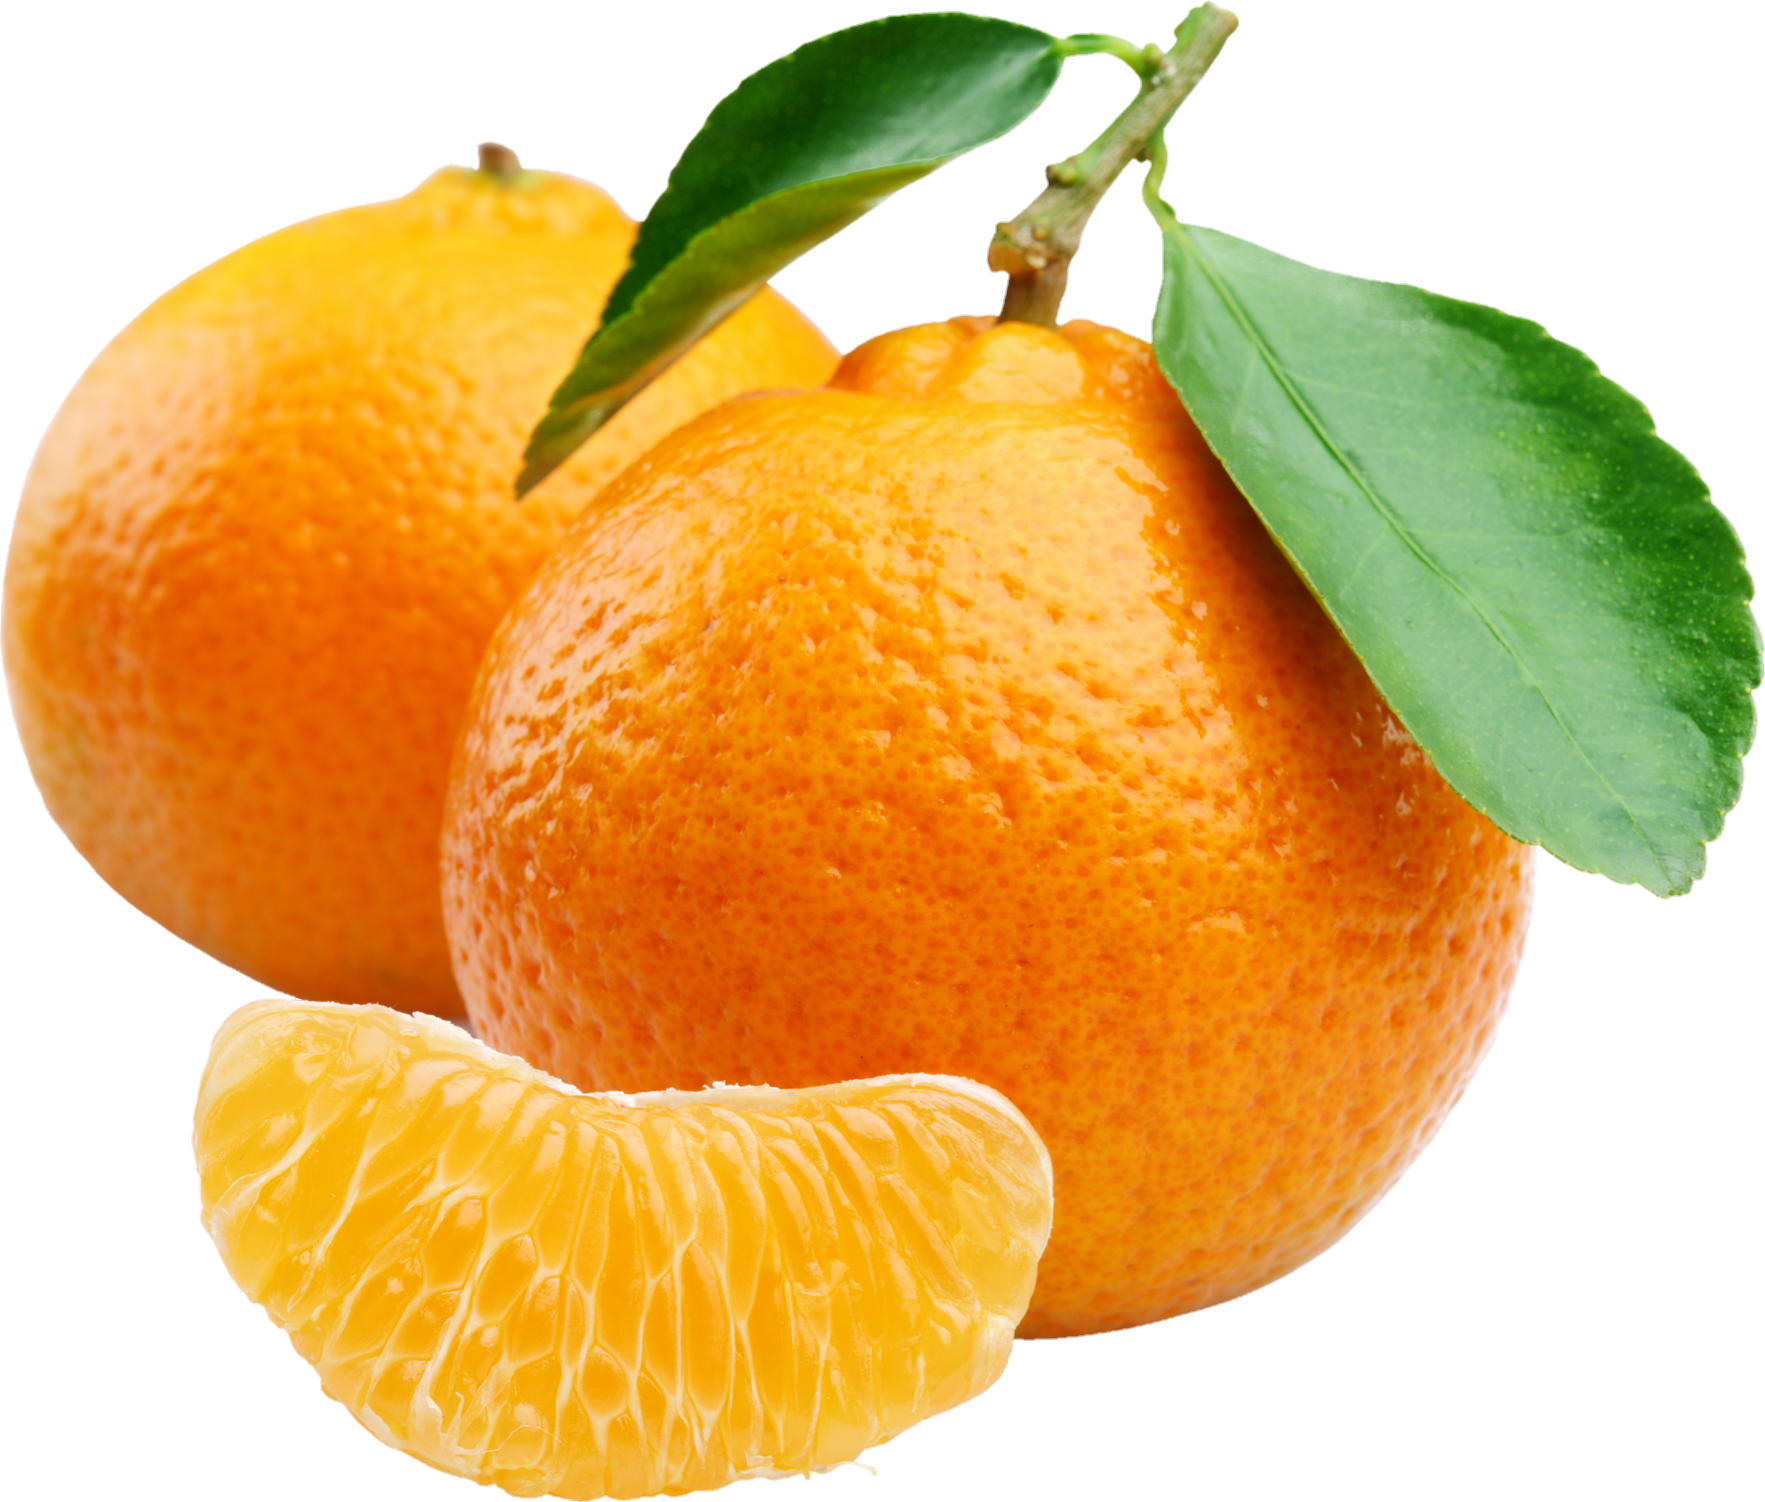 orange-png-from-pngfre-10